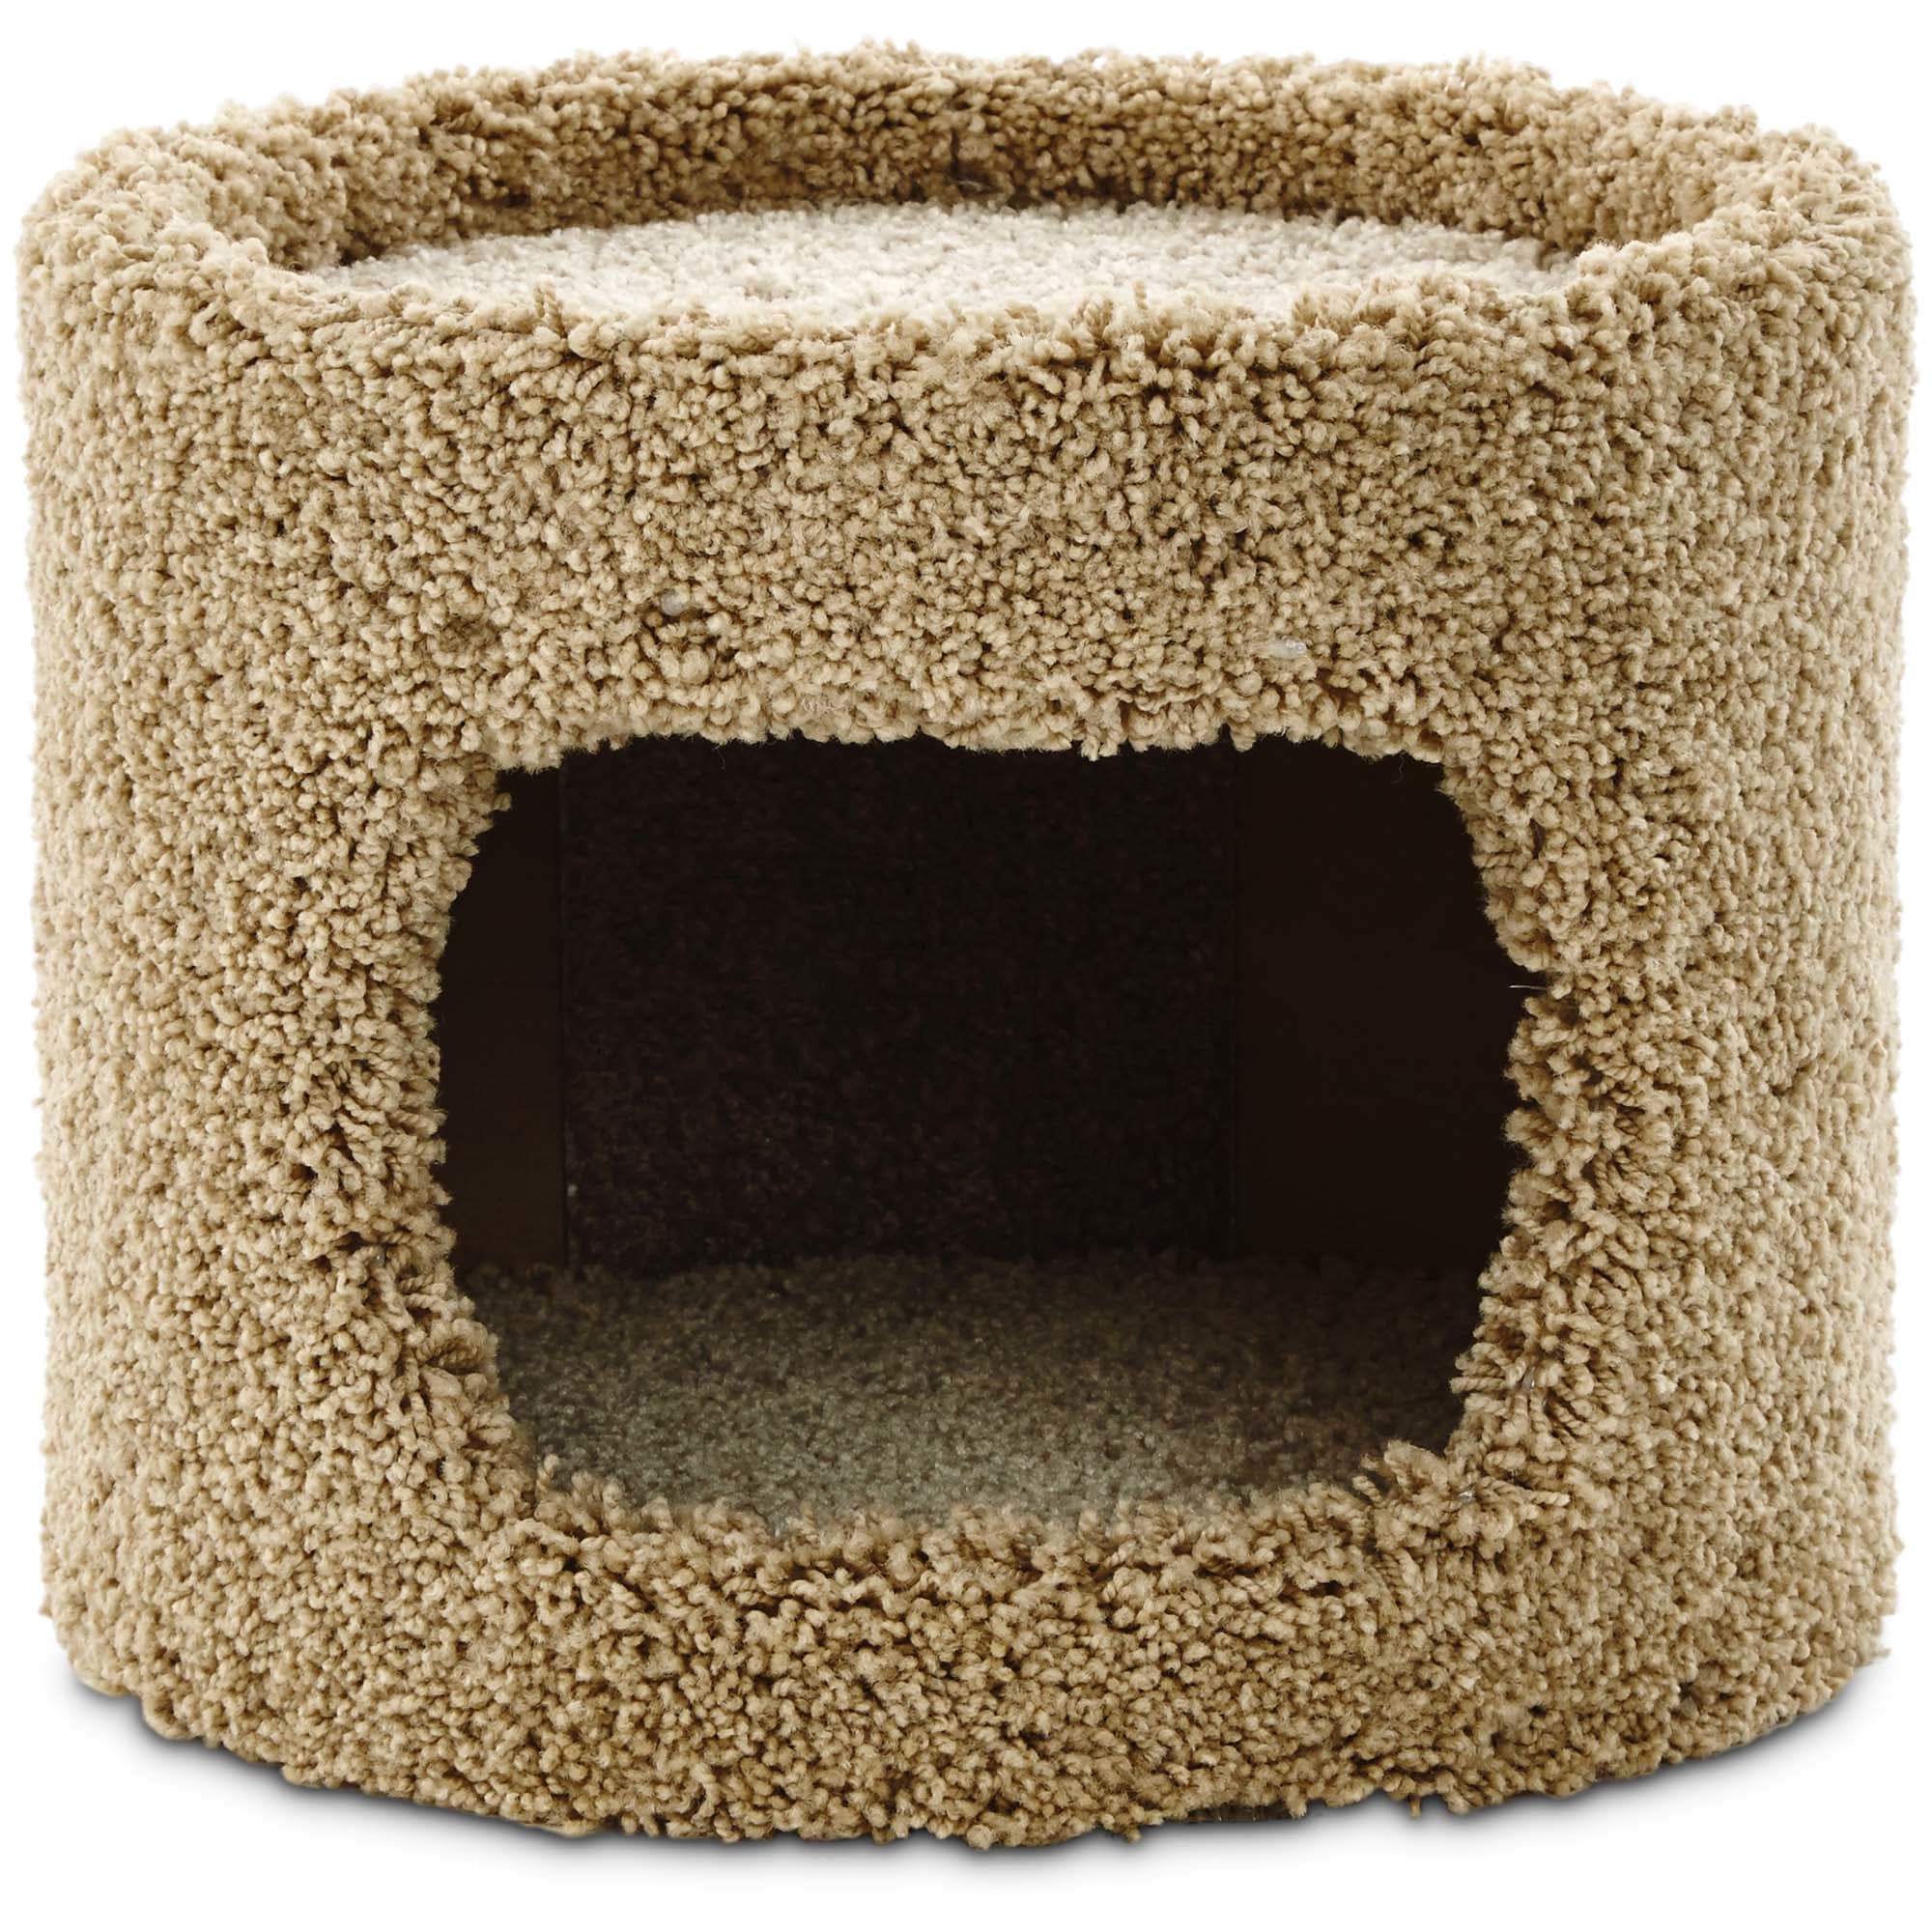 everyyay-secret-hideout-small-cat-condo-with-hideaway-13-5-l-x-13-5